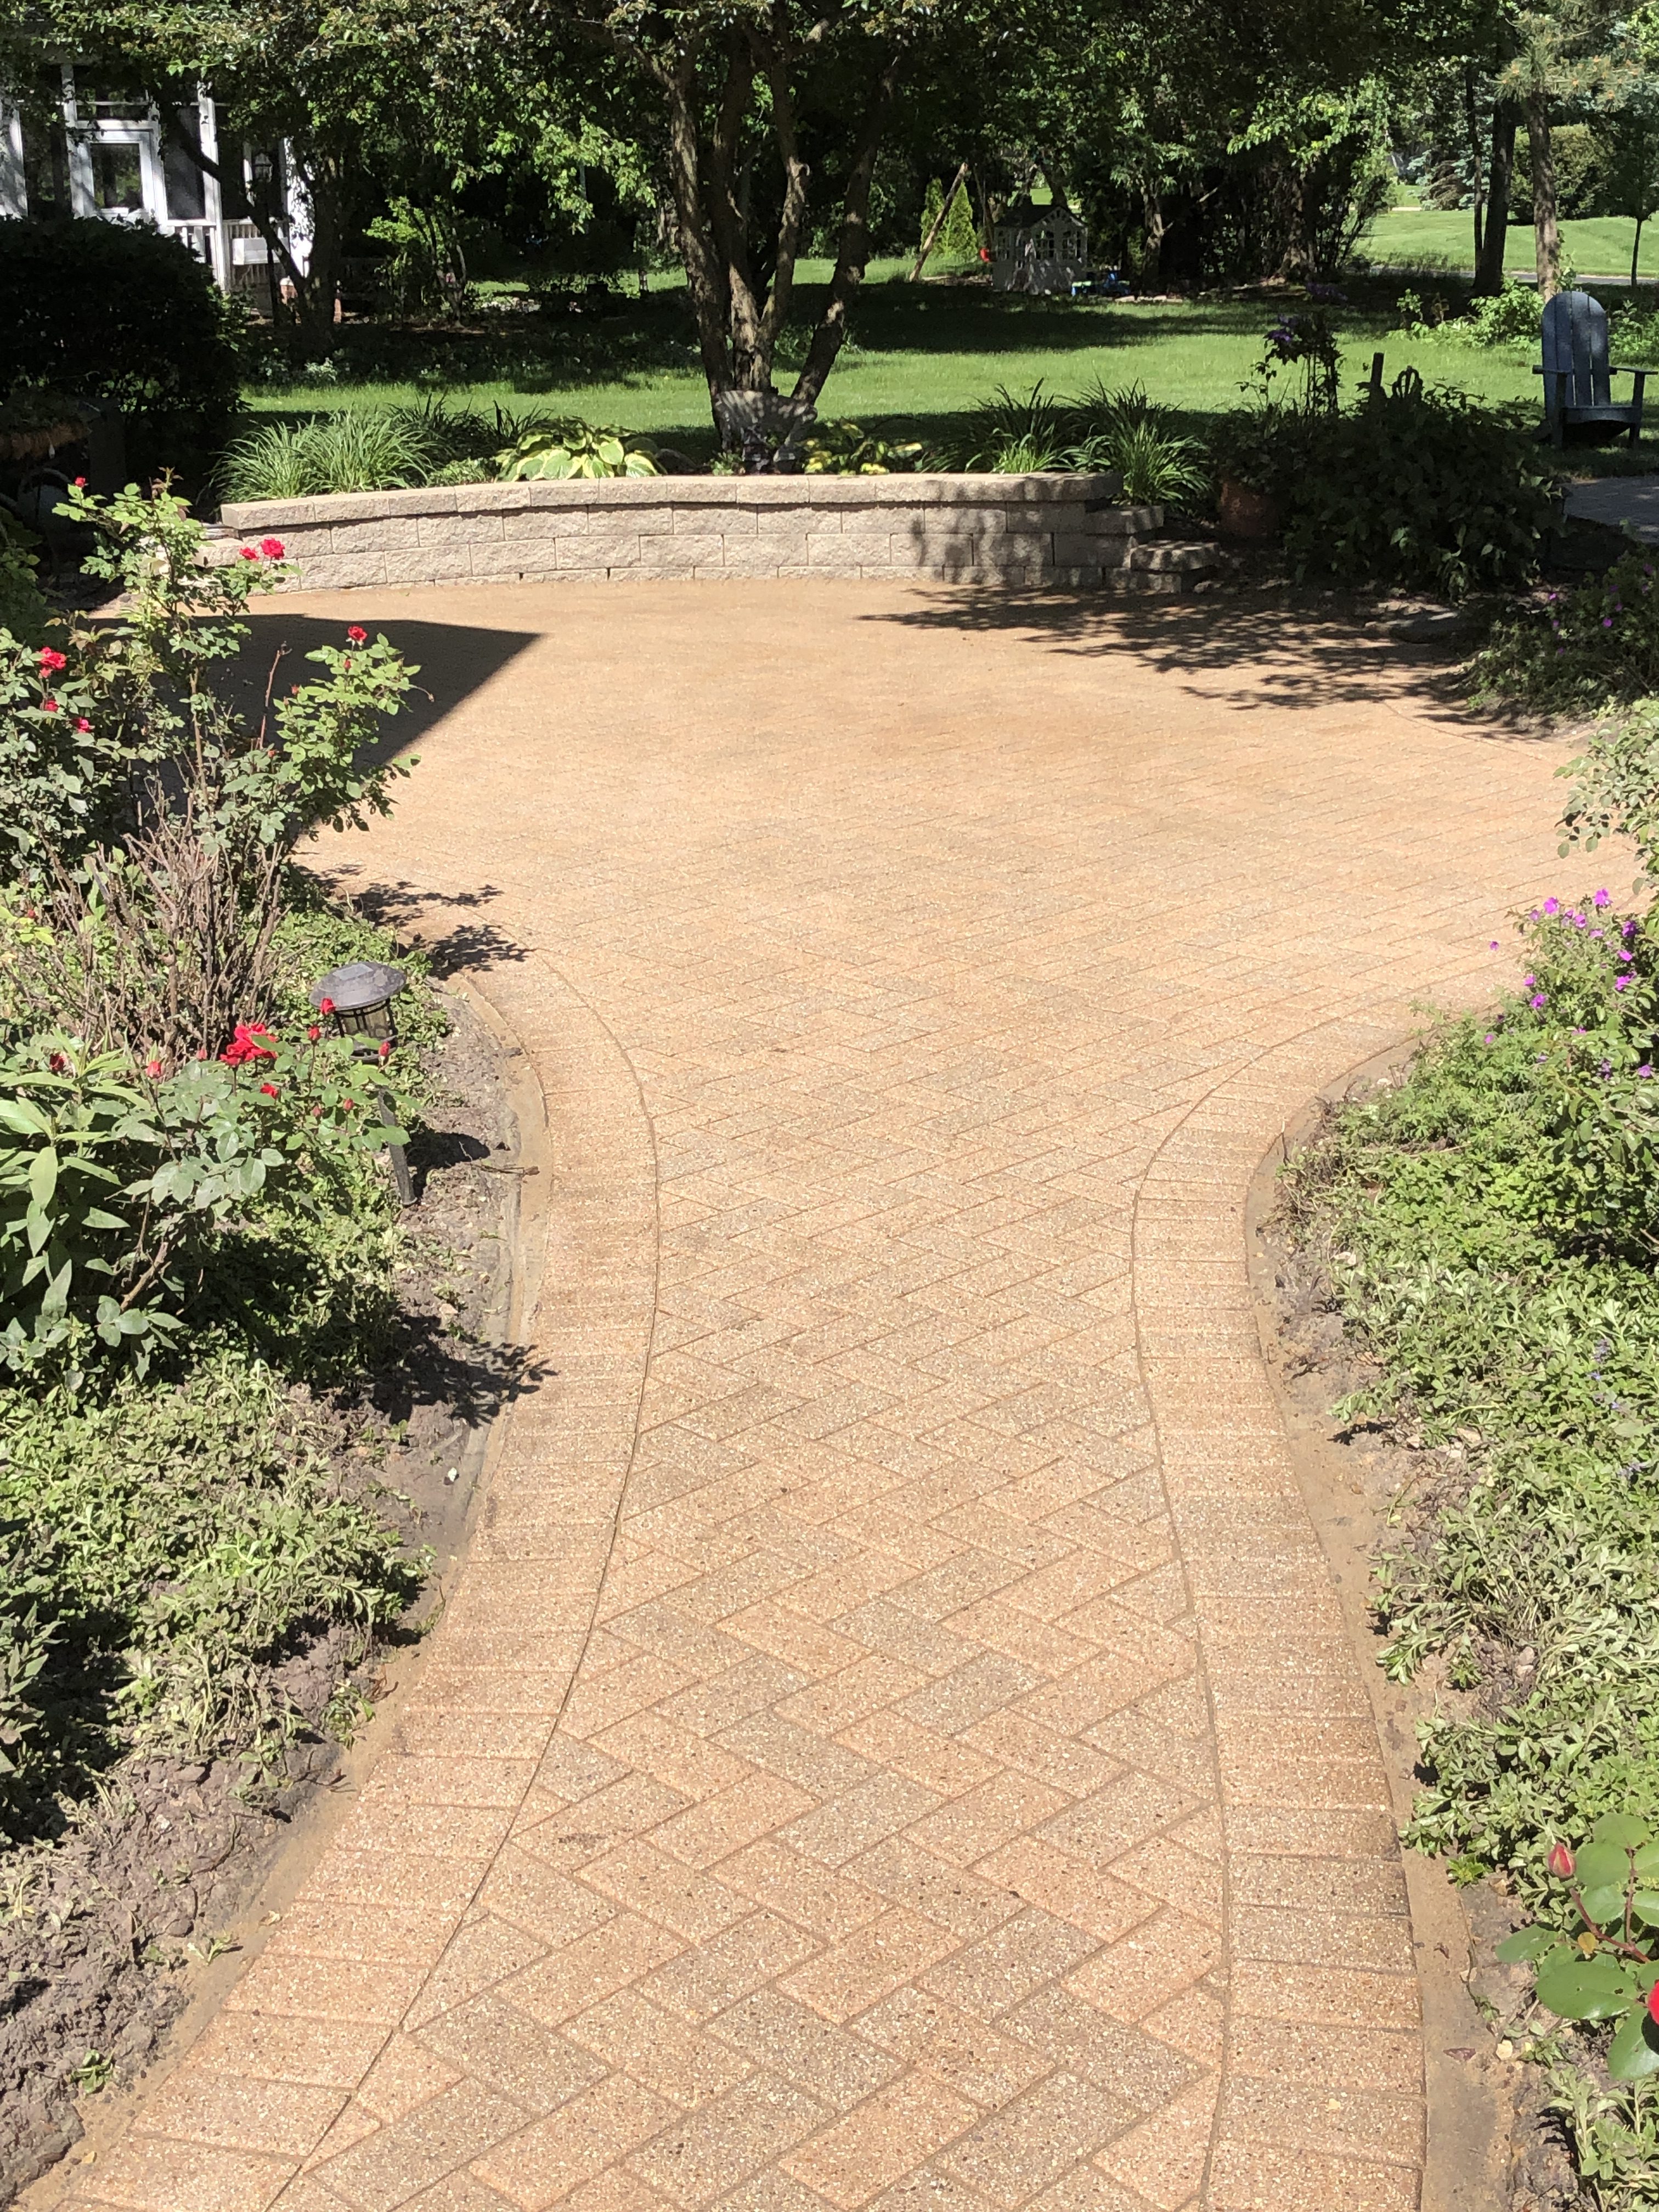 Brick Paver Cleaning & Sealing by Paver Protector in St. Charles, IL